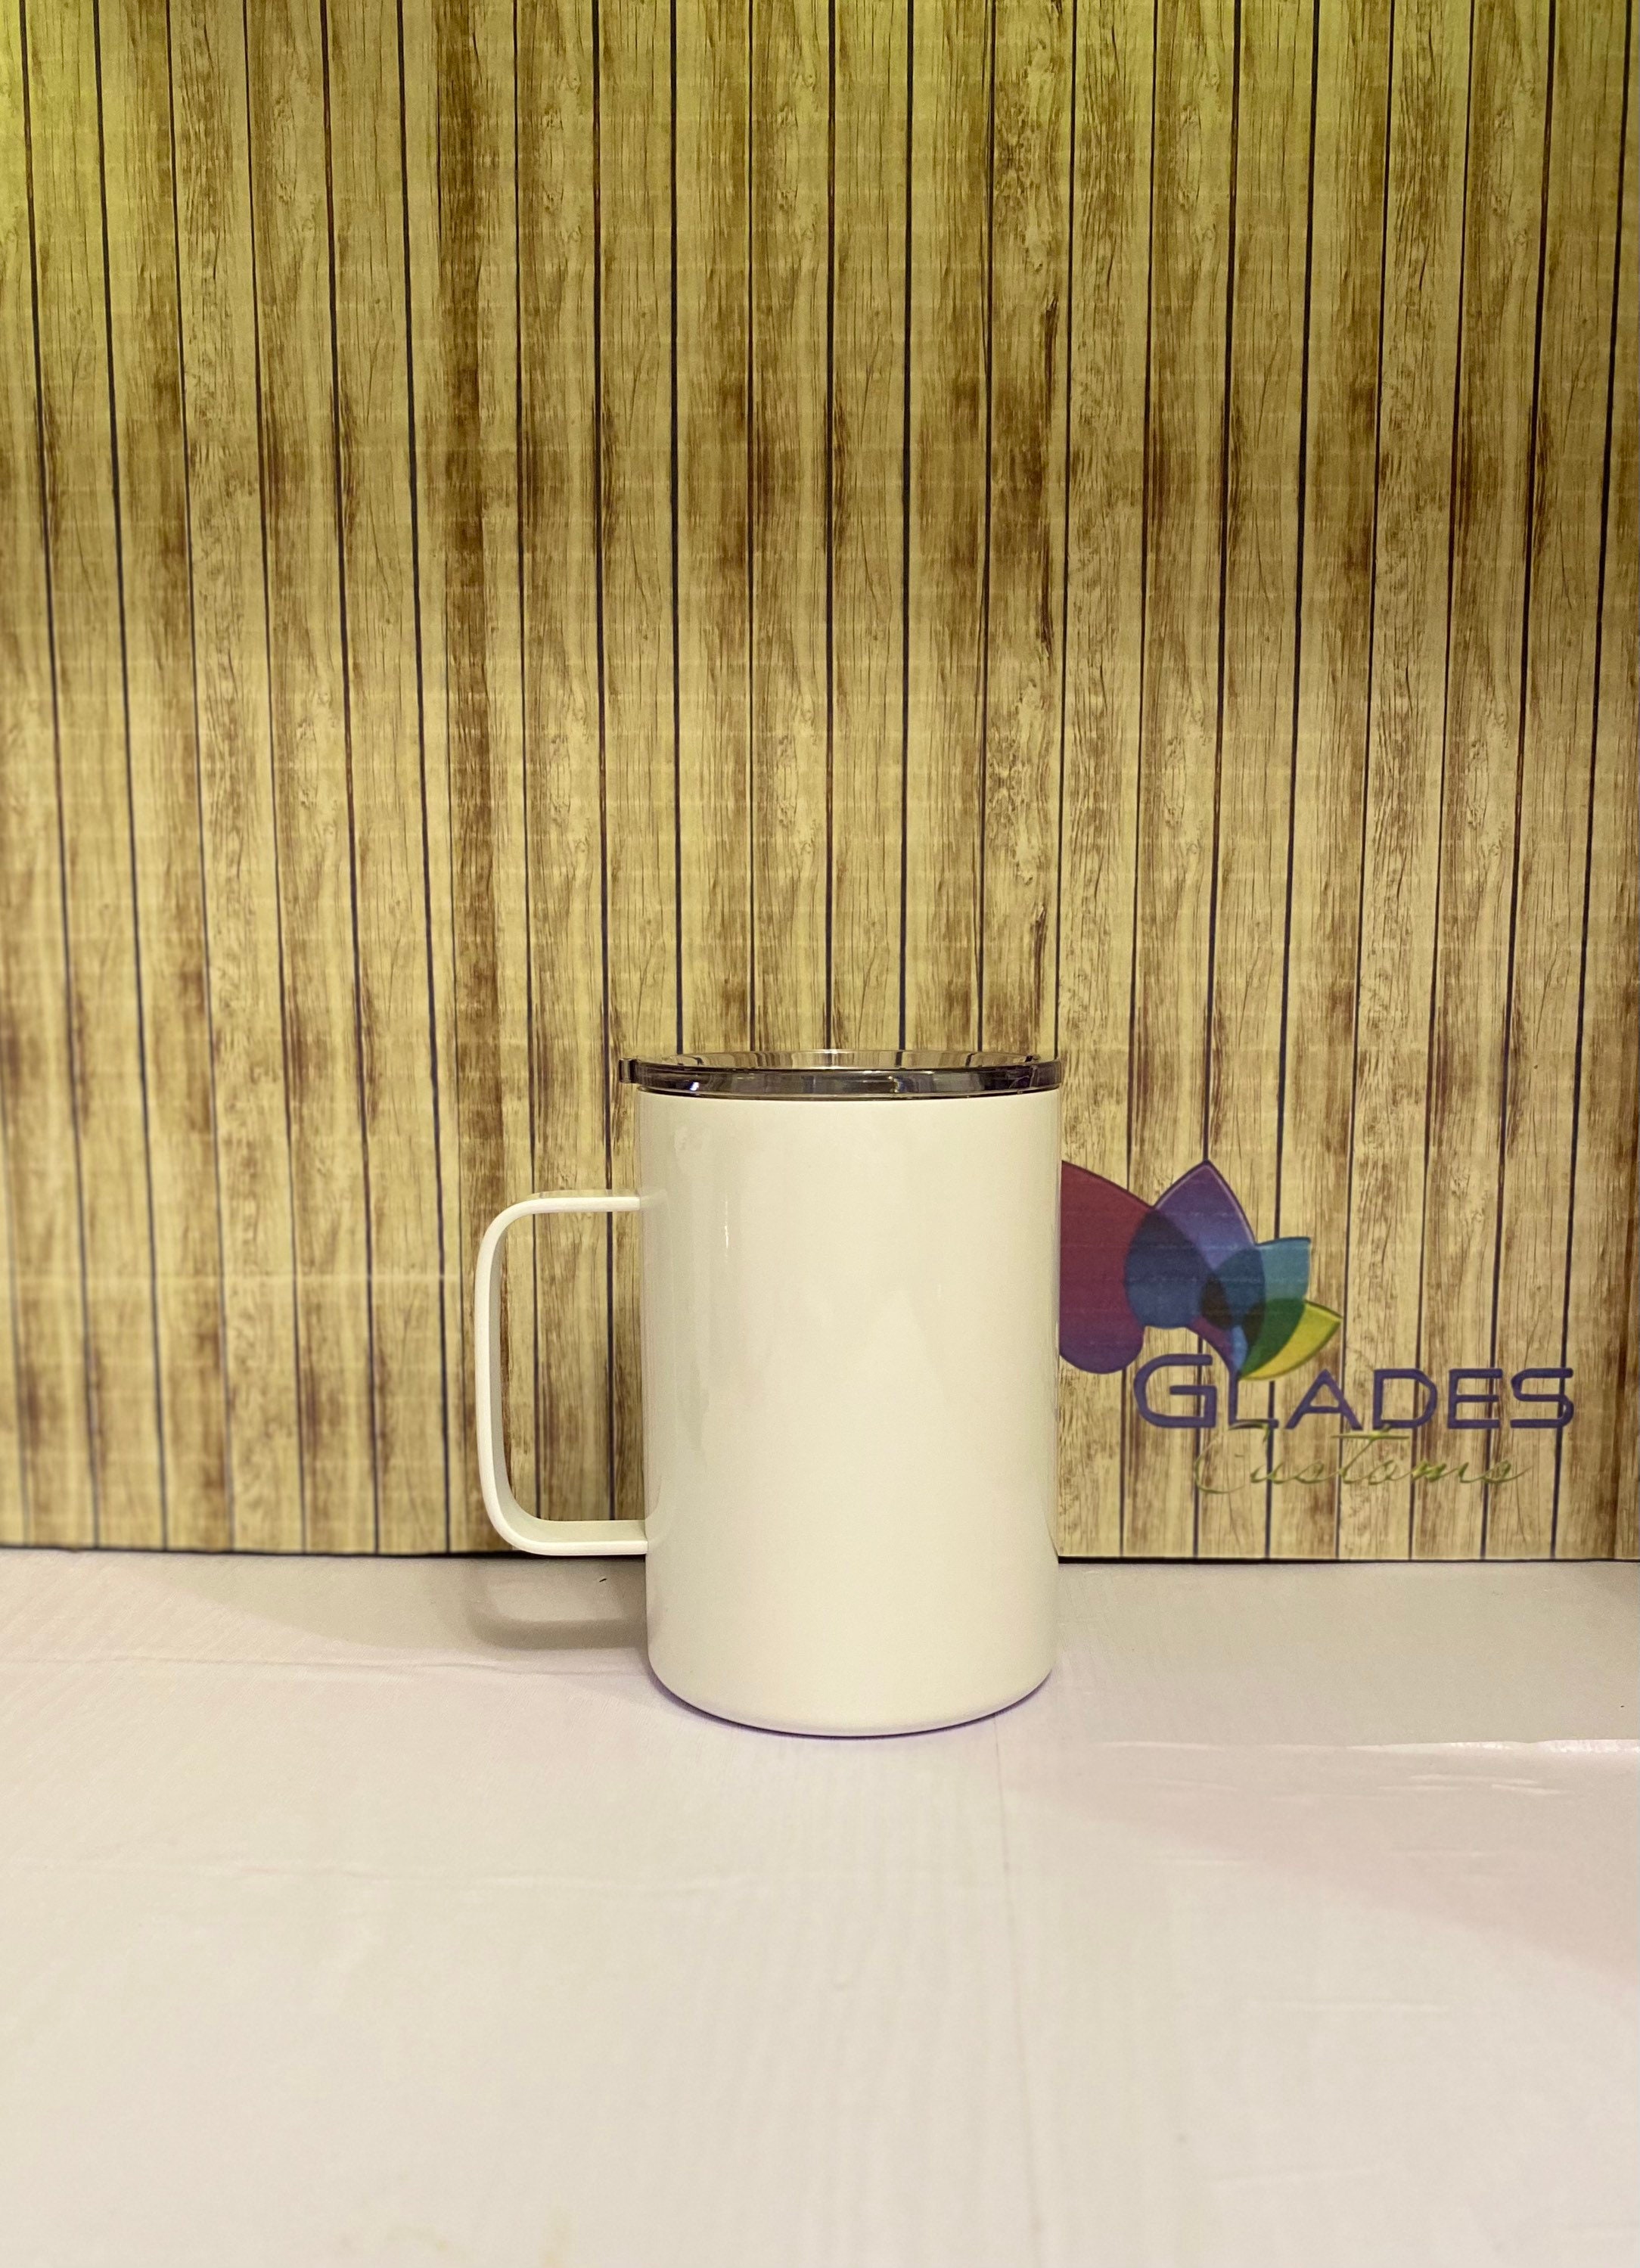 16 oz Stainless Steel Thermal Travel Mug - Silver – Blank Sublimation Mugs